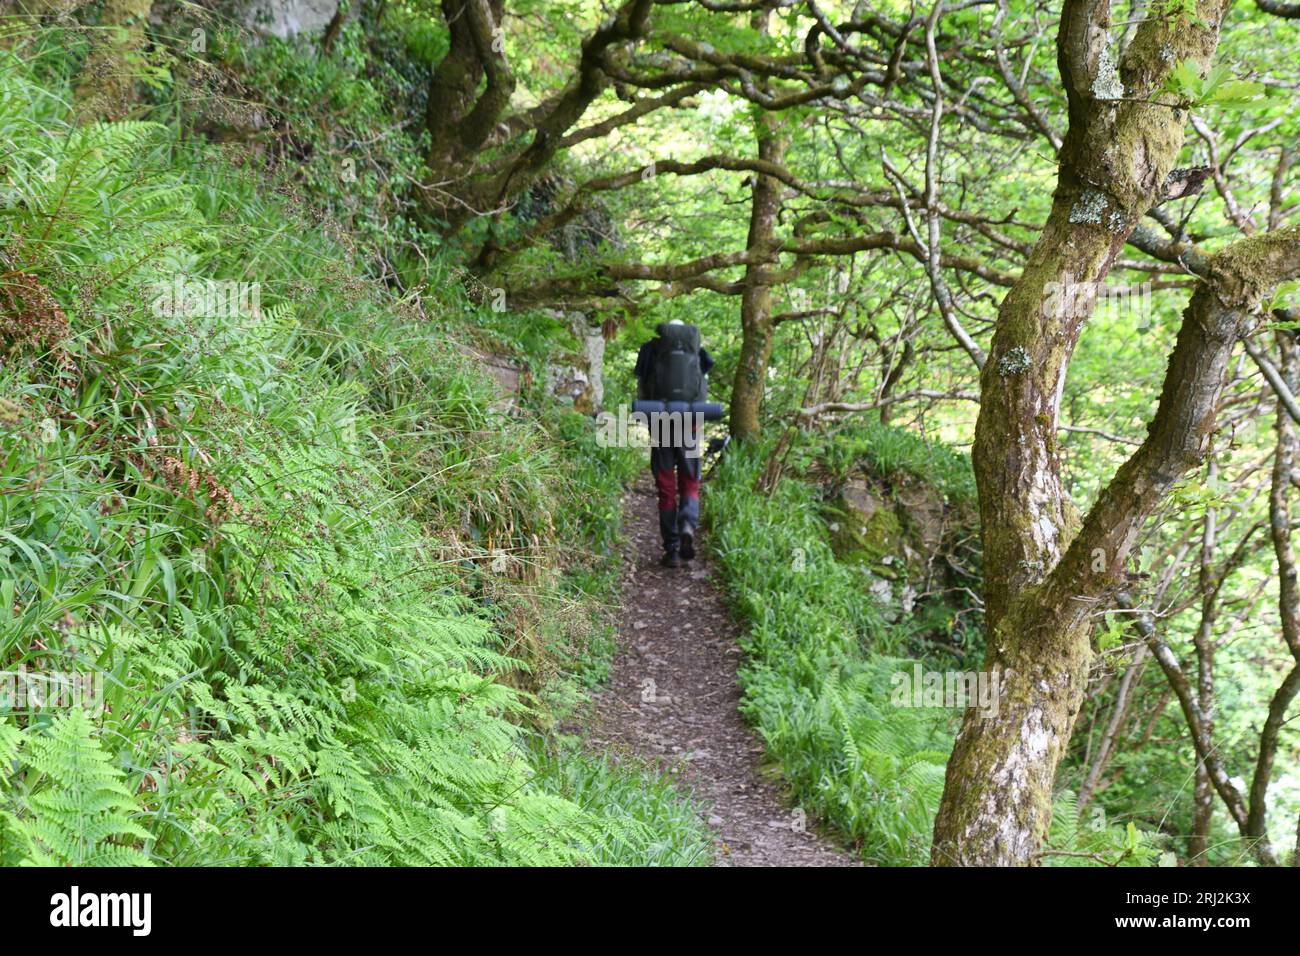 A hiker walking along the South West Coast path through the sessile oak 'Quercus petraea'  woods  on the steeply sloping cliff between Woody bay and H Stock Photo